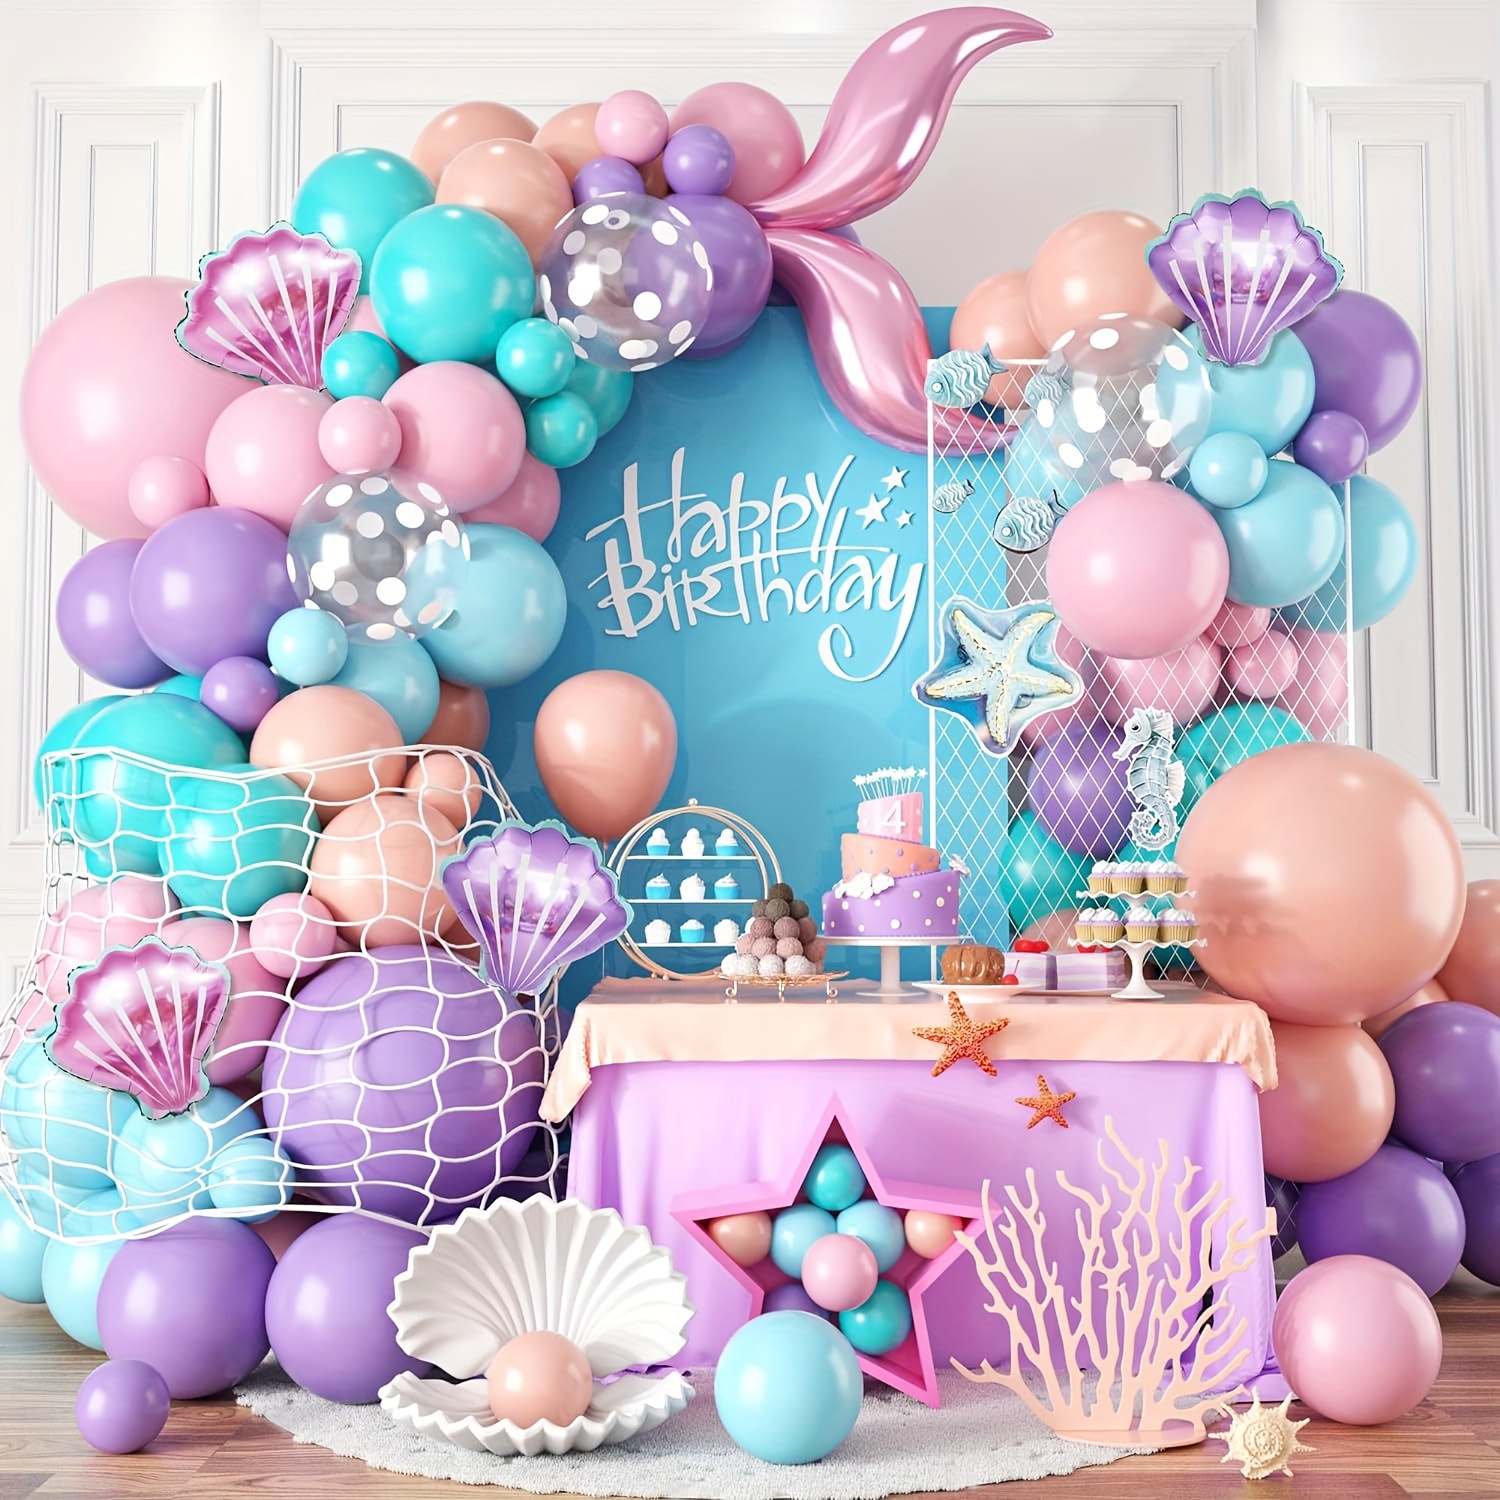 

Mermaid Theme Birthday Decoration Set - 127 Pieces, Ocean Party Balloons Garland Kit, Mermaid Tail & Shell Foil Balloons For Wedding, Birthday, Reunion - Suitable For Ages 14+ - No Electricity Needed